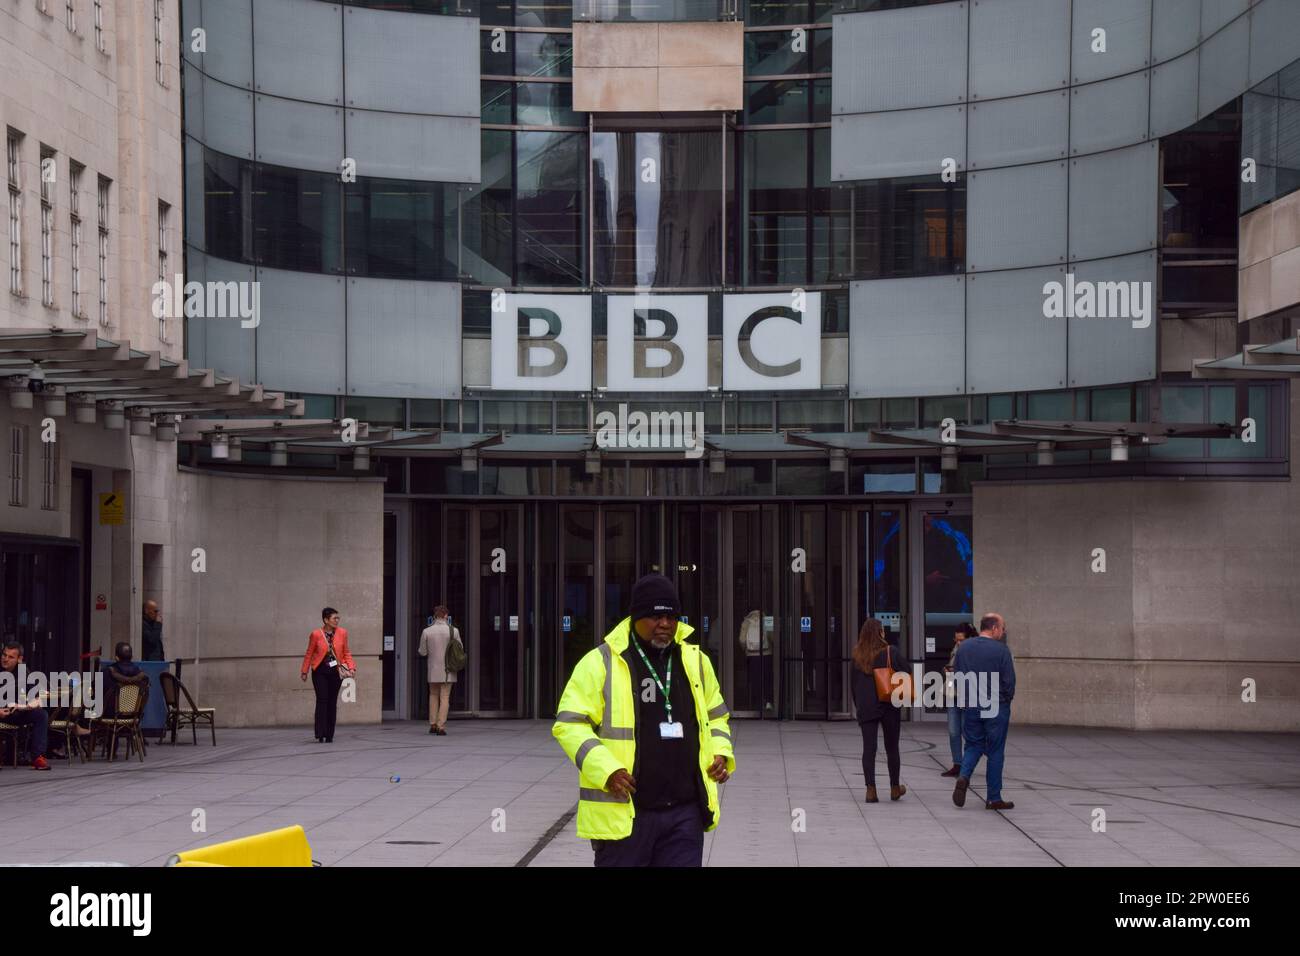 General view of Broadcasting House, the BBC headquarters in Central London. BBC chair Richard Sharp has resigned after it emerged that he failed to declare his role in a £800,000 loan made to former Prime Minister Boris Johnson. Stock Photo